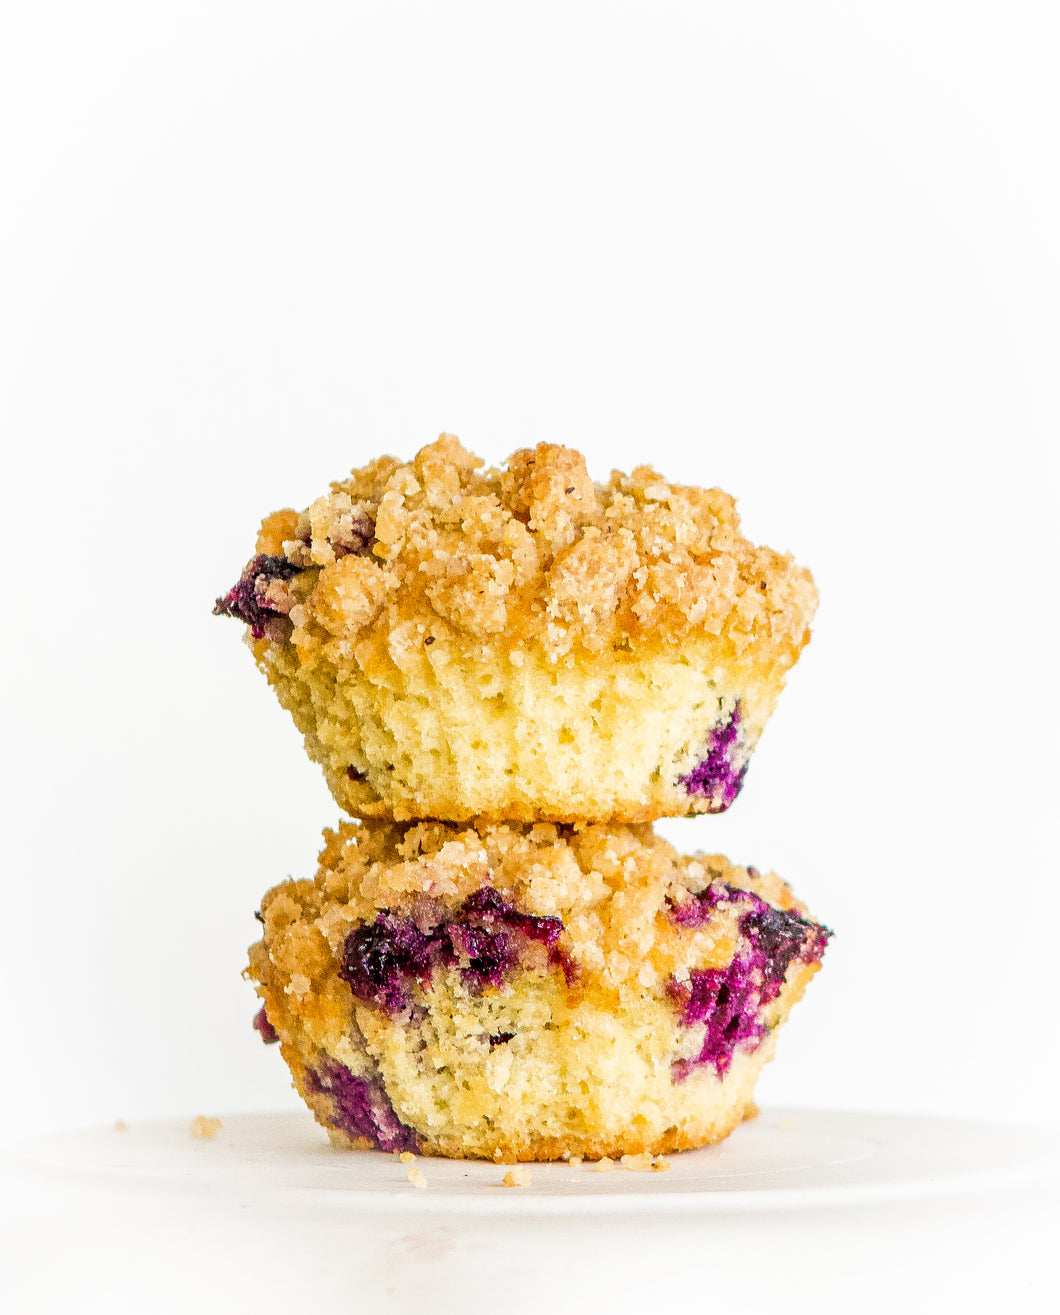 Blueberry Muffins with Almond & Cinnamon Streusel (Requires egg)